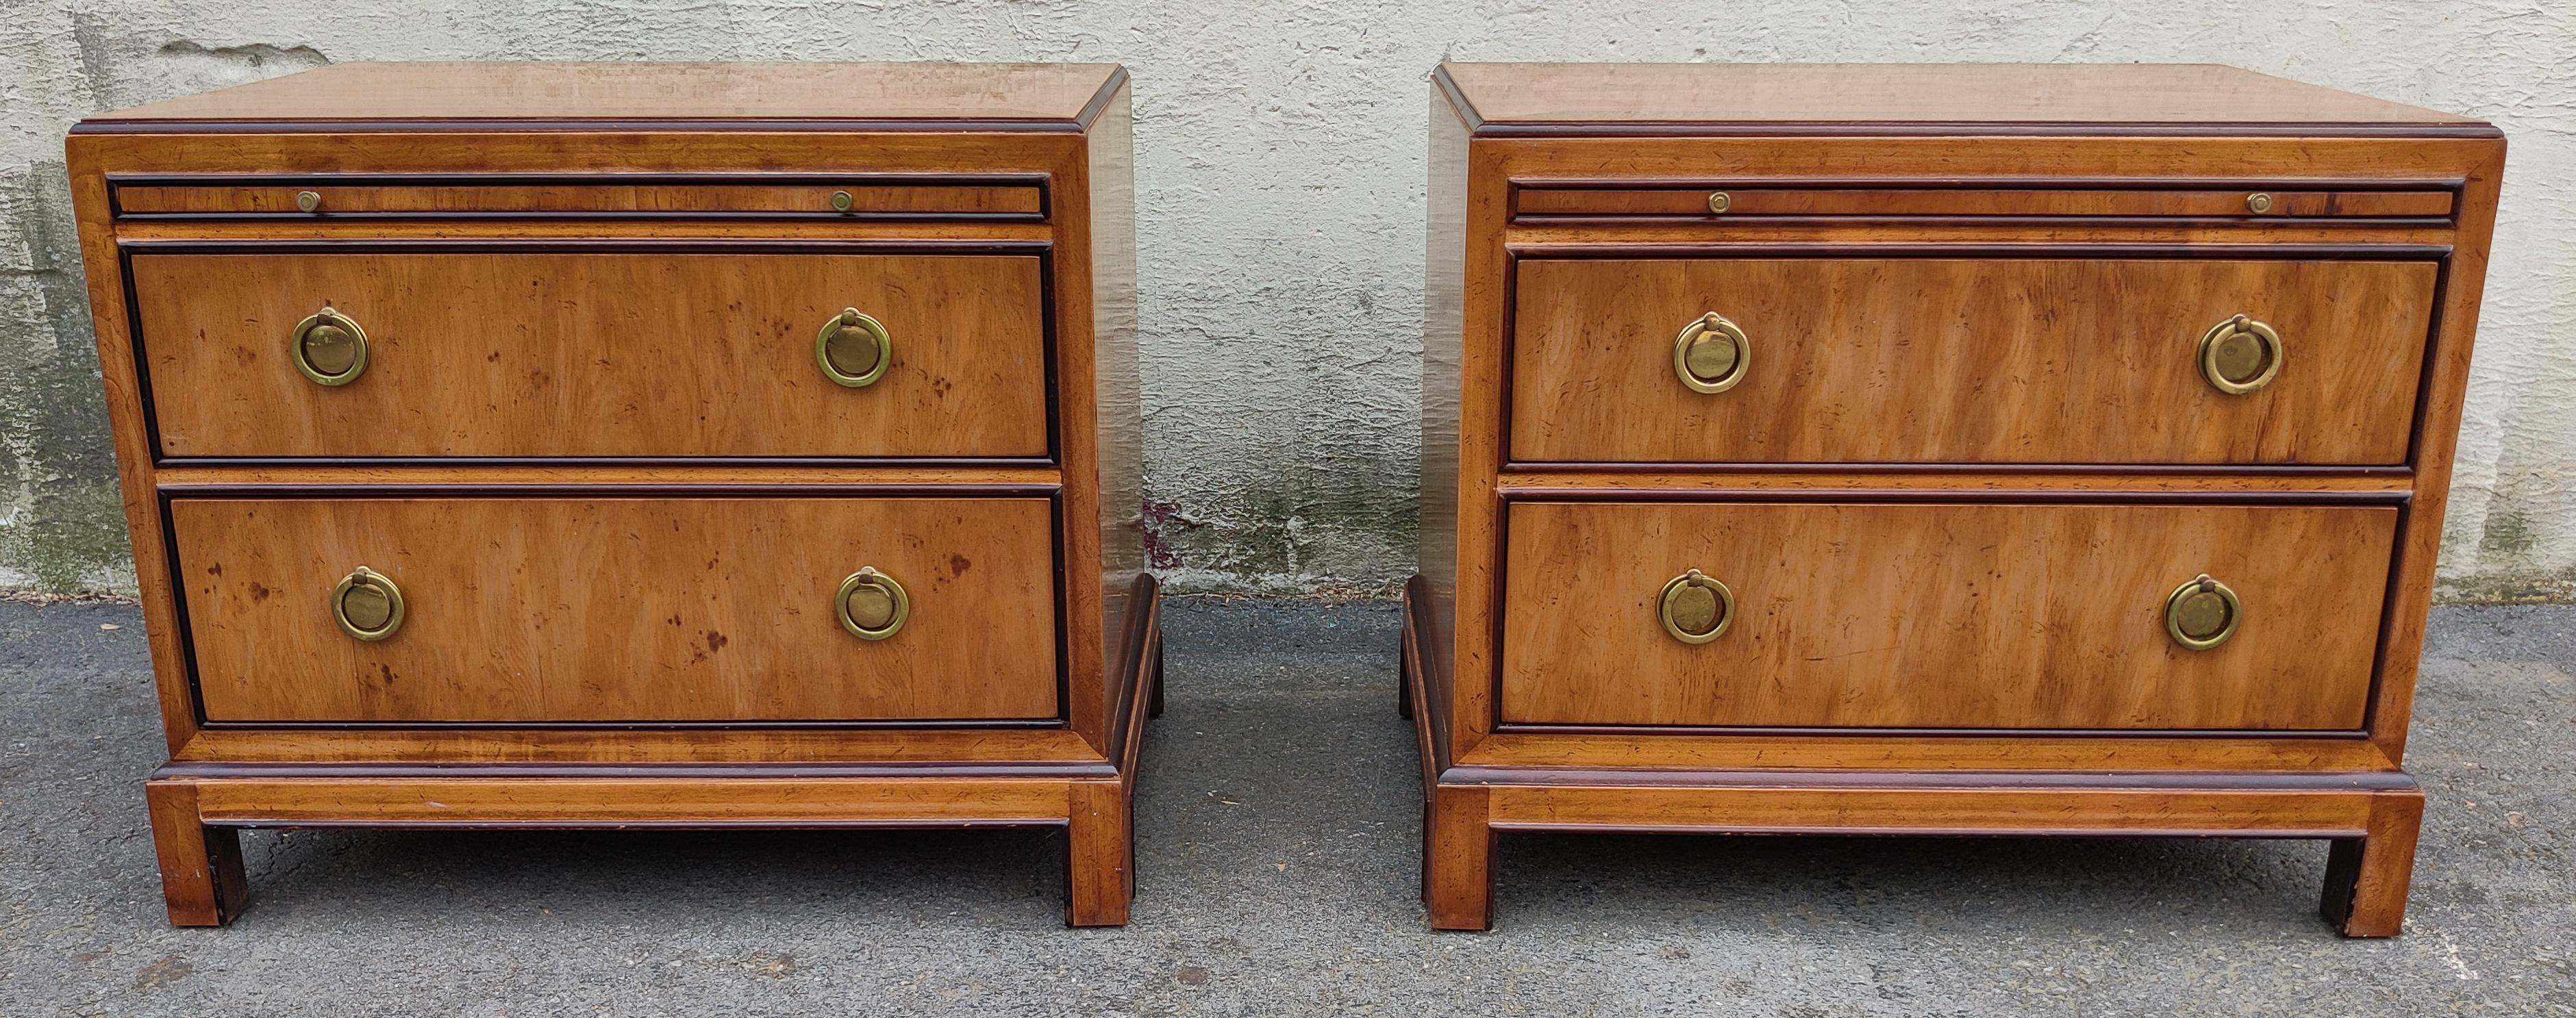 This beautiful pair of nightstands or end tables was made in the 1970s by Drexel Heritage for their 